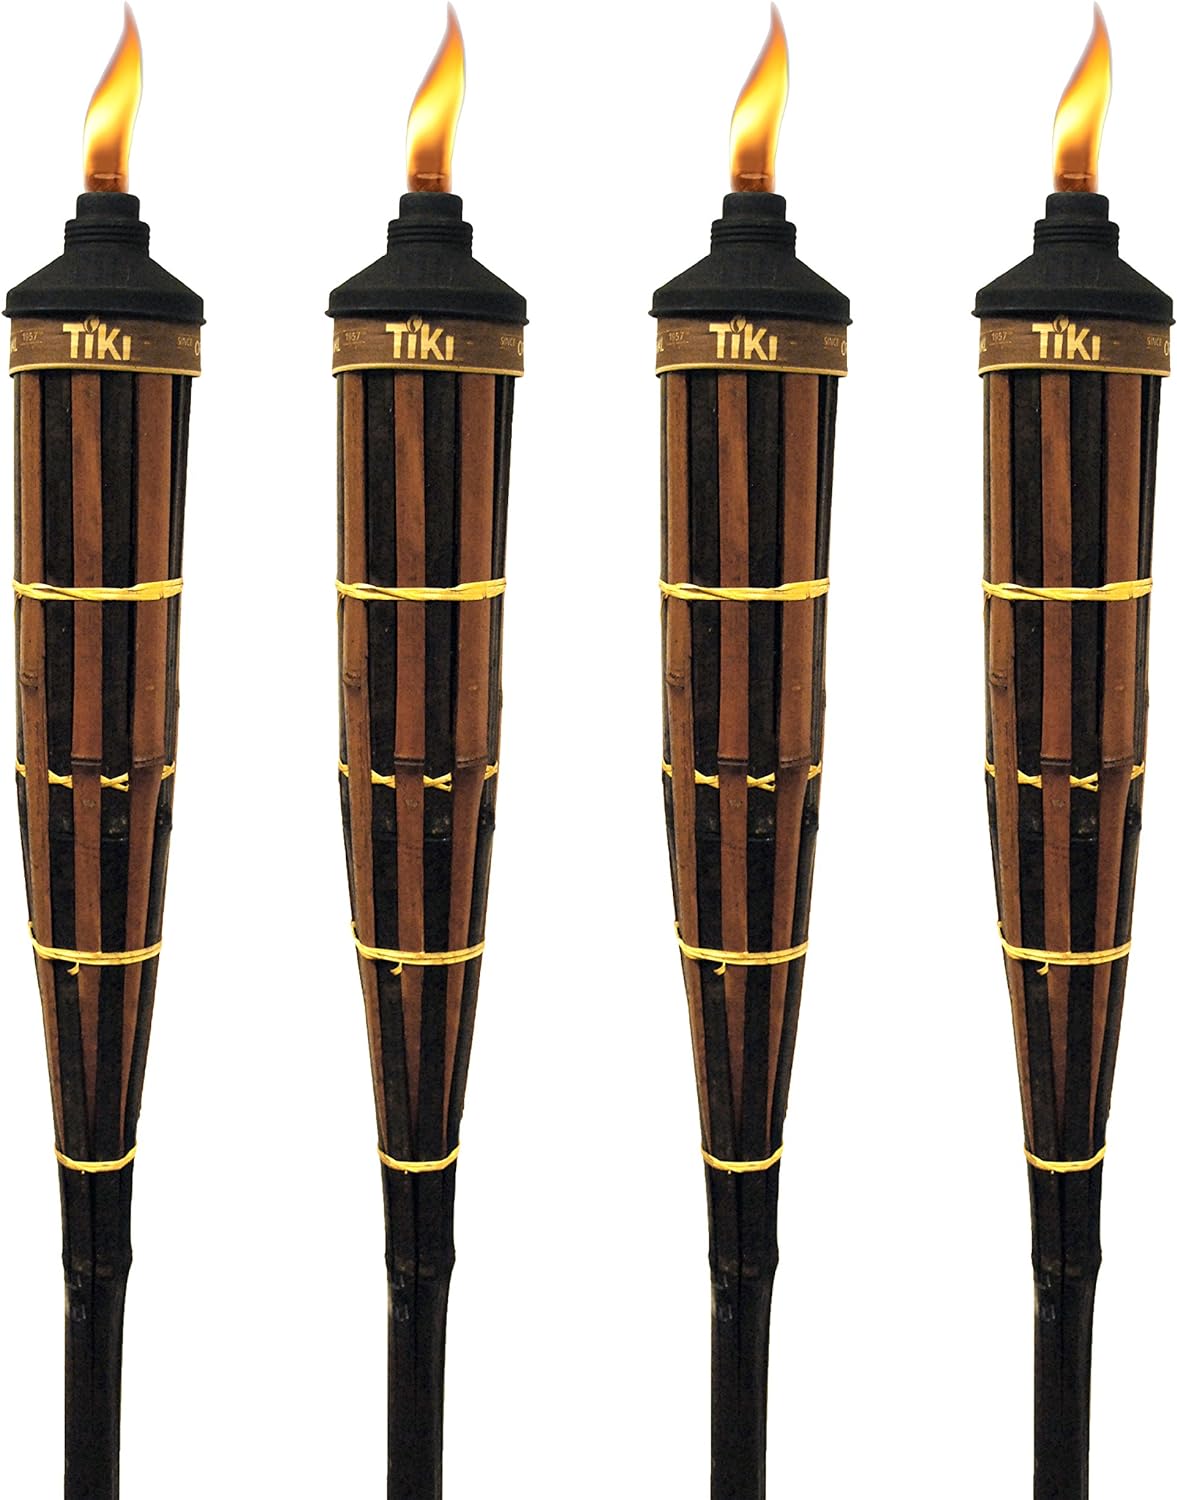 We purchased 10 of these torches for our back yard. They were easy to assemble and we attached them to a fence with tie wraps. They will work great in the area around our Bocce Court. We put 3 in a flower bed near the house and outside deck. When pushing one on the poles into the ground the pole bent at the bottom joint and there is no way to straighten it. So we now have one torch that is shorter than the rest but will still work for what we intended it for.